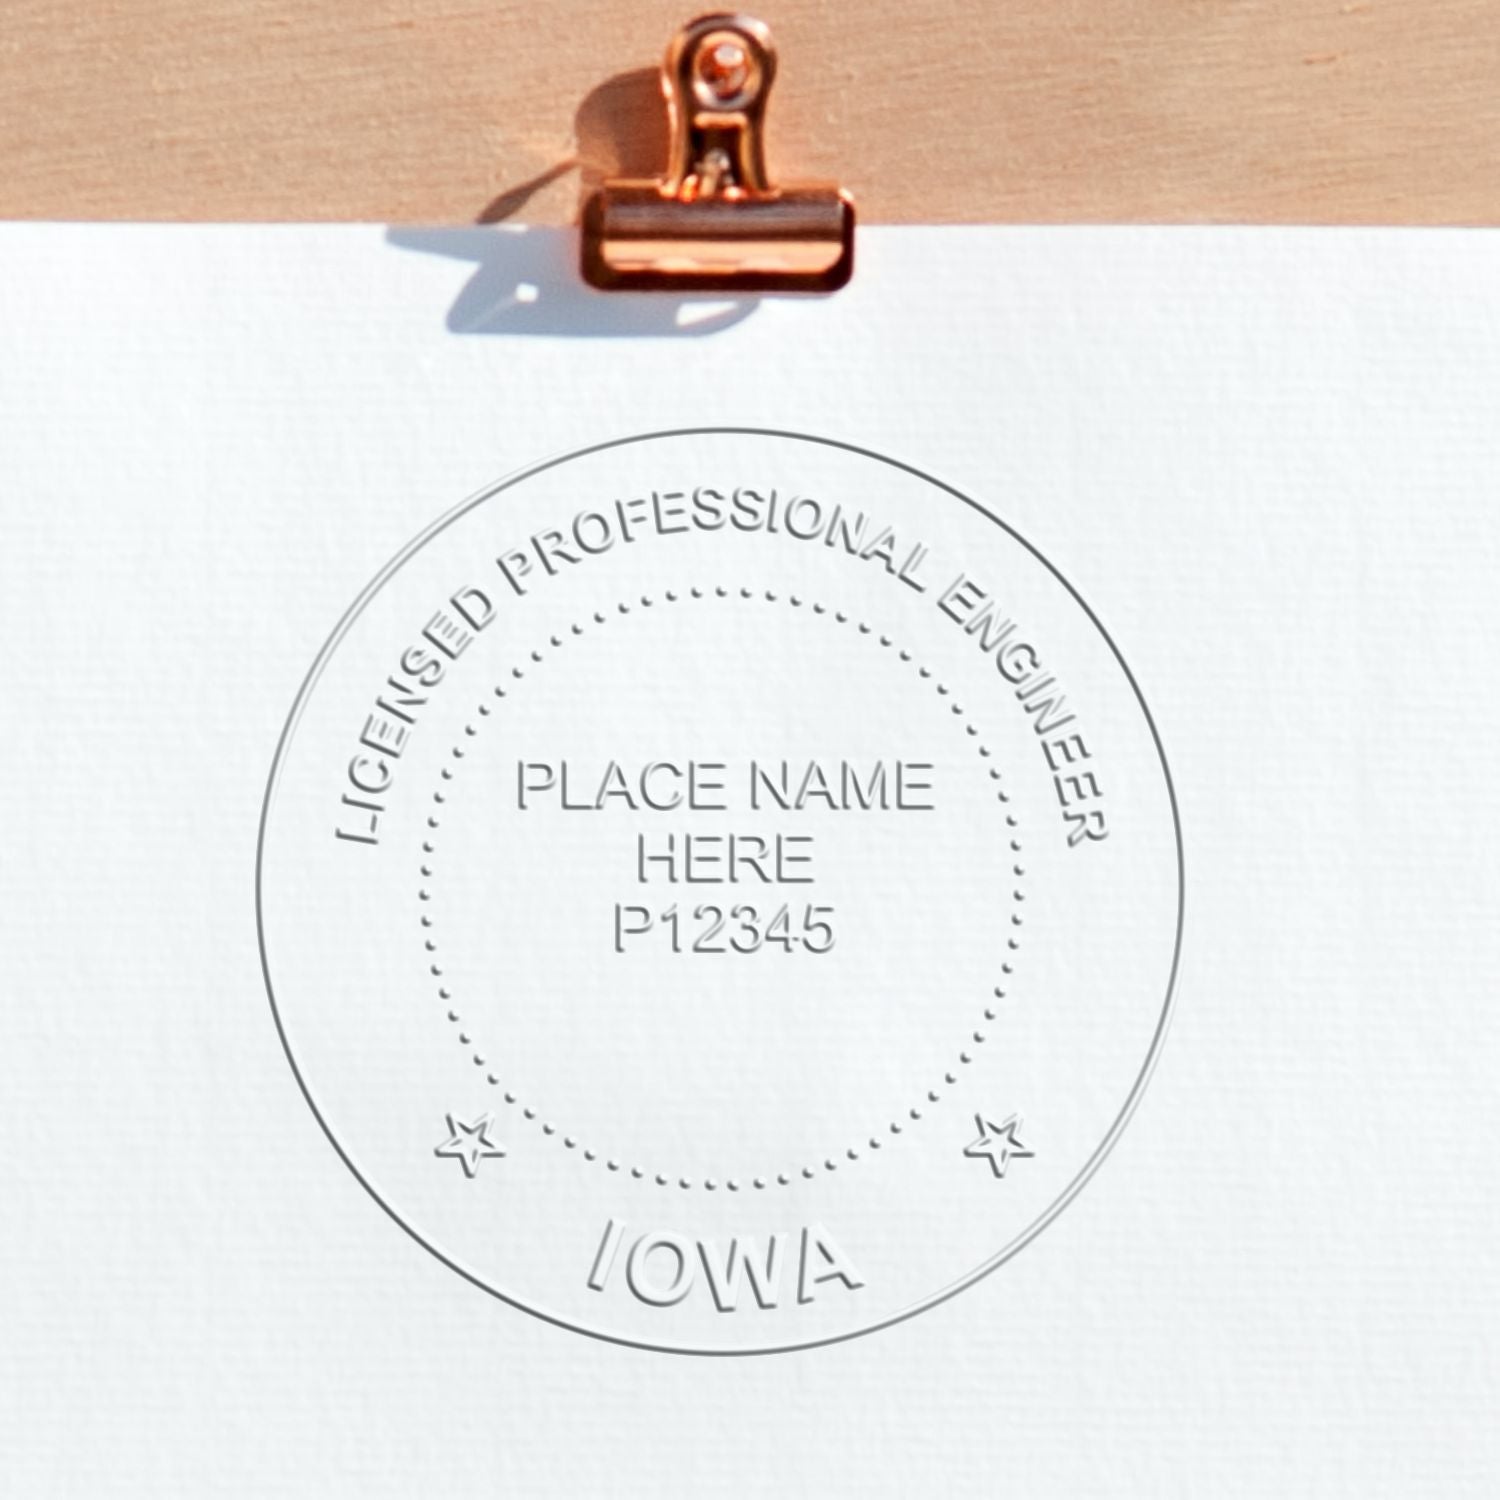 A stamped impression of the Iowa Engineer Desk Seal in this stylish lifestyle photo, setting the tone for a unique and personalized product.